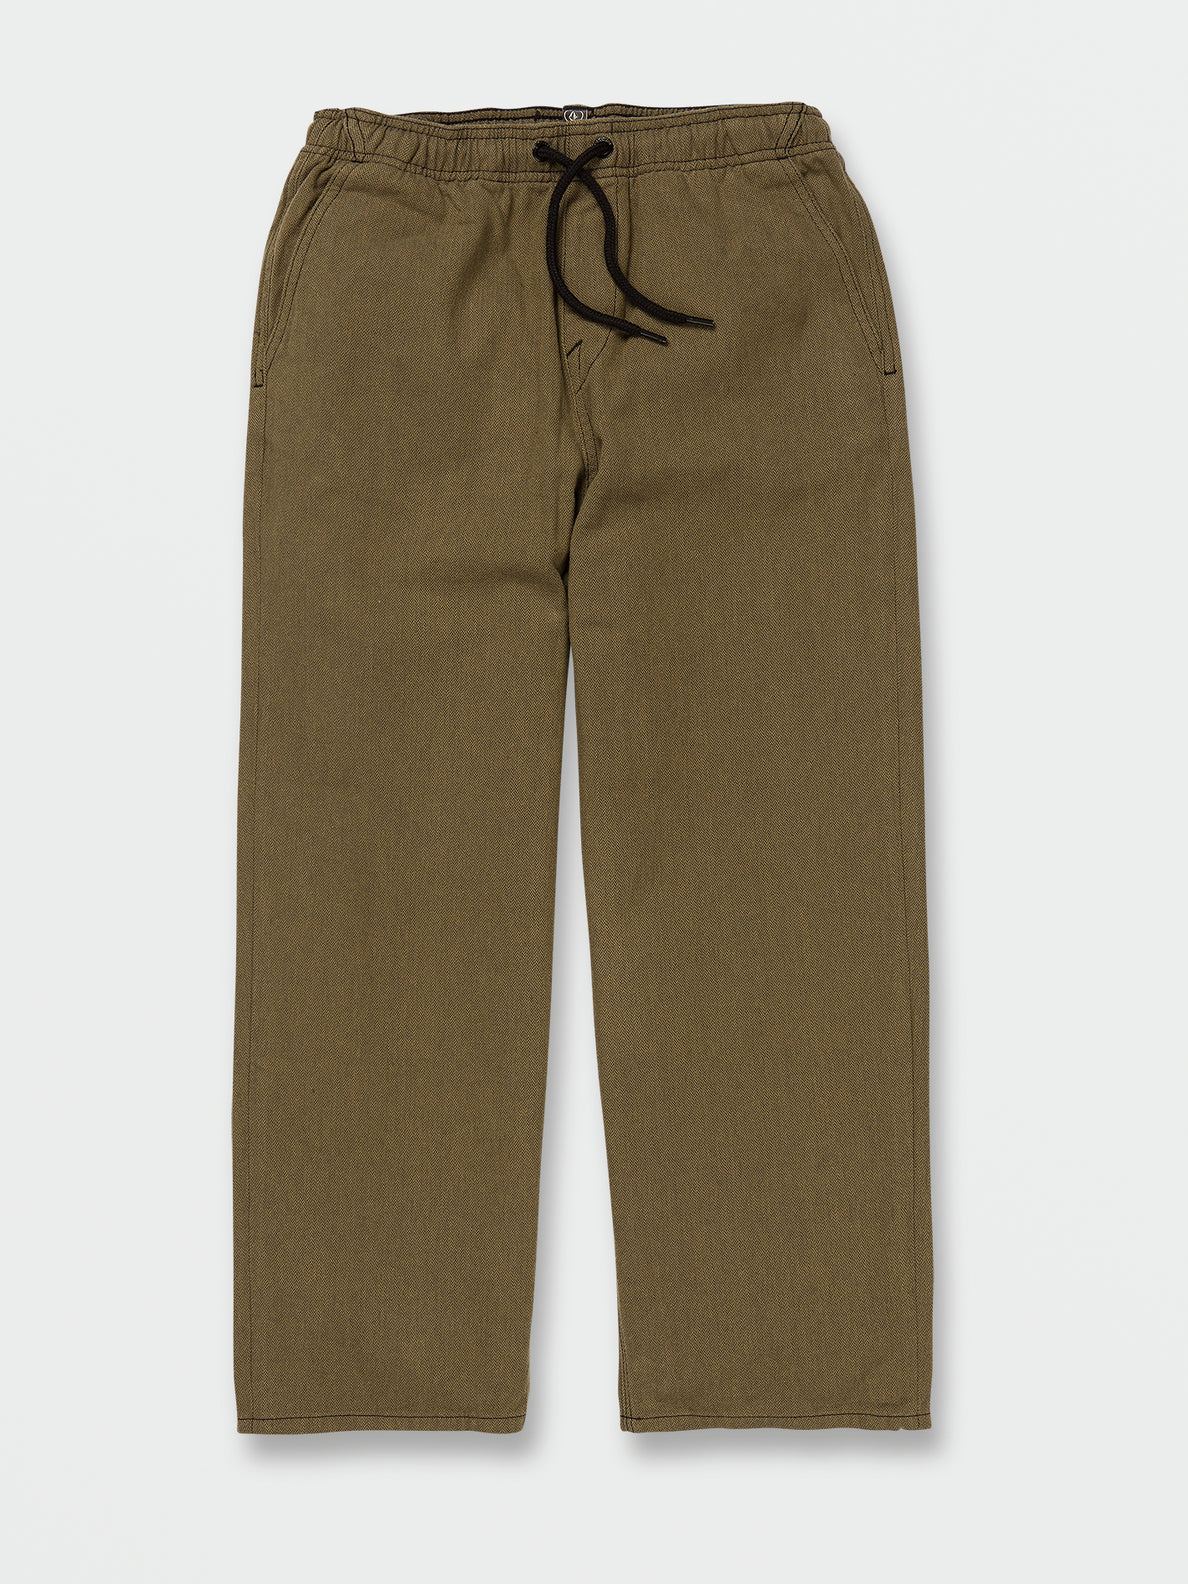 Big Boys Outer Spaced Elastic Waist Pants - Old Mill (C1232232_OLM) [F]